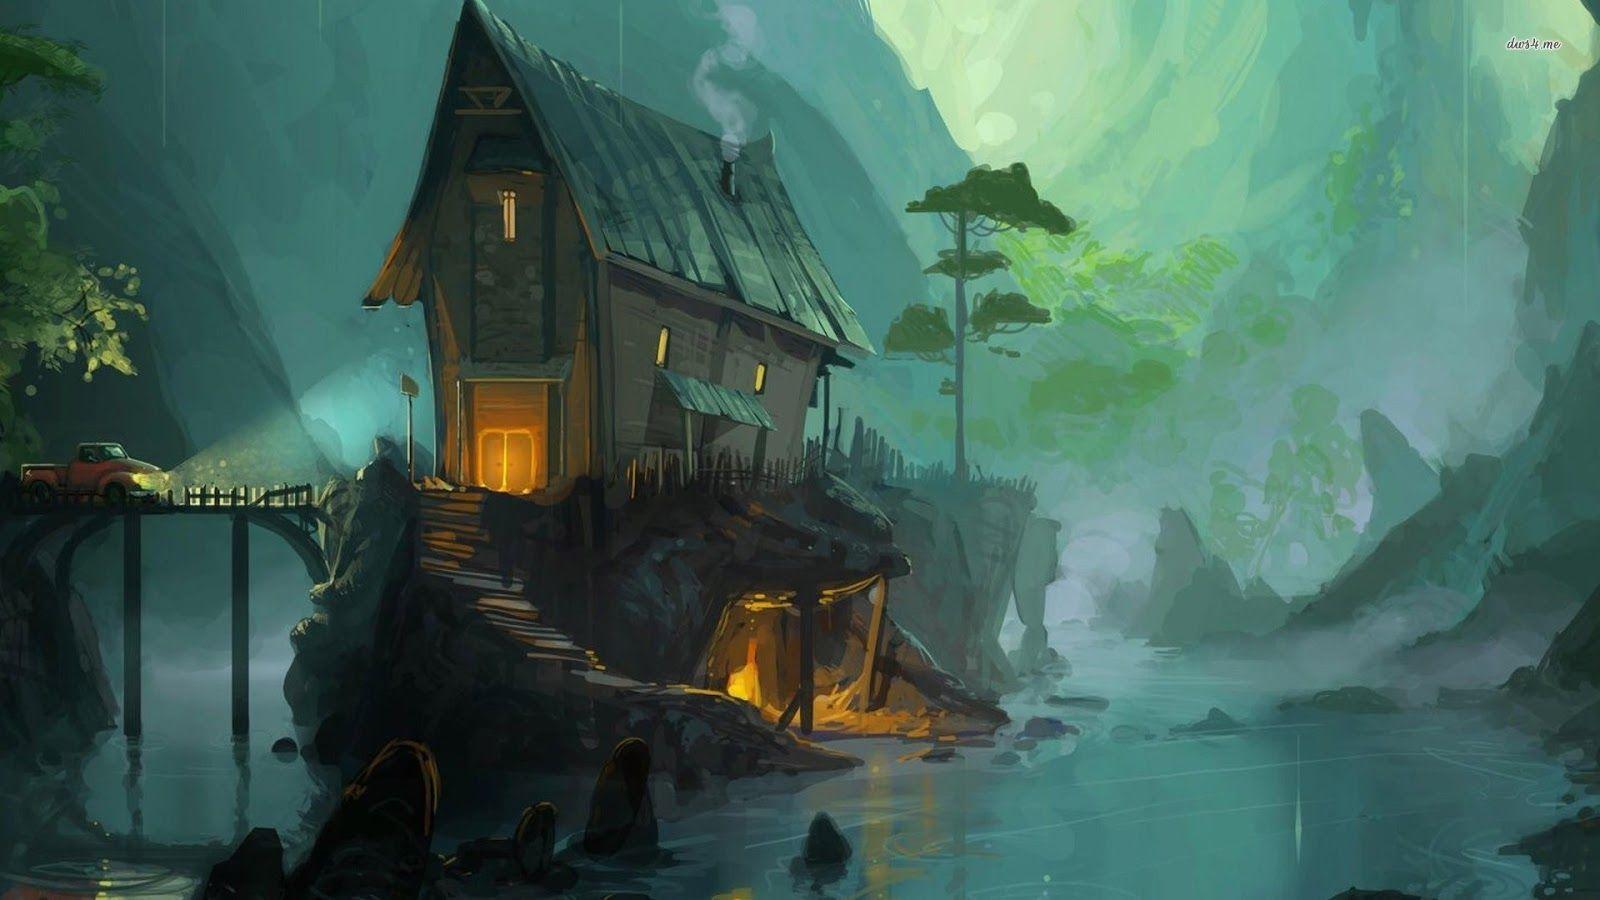 I Love Tree House: Tree House on the River Side Wallpaper 1920x1080